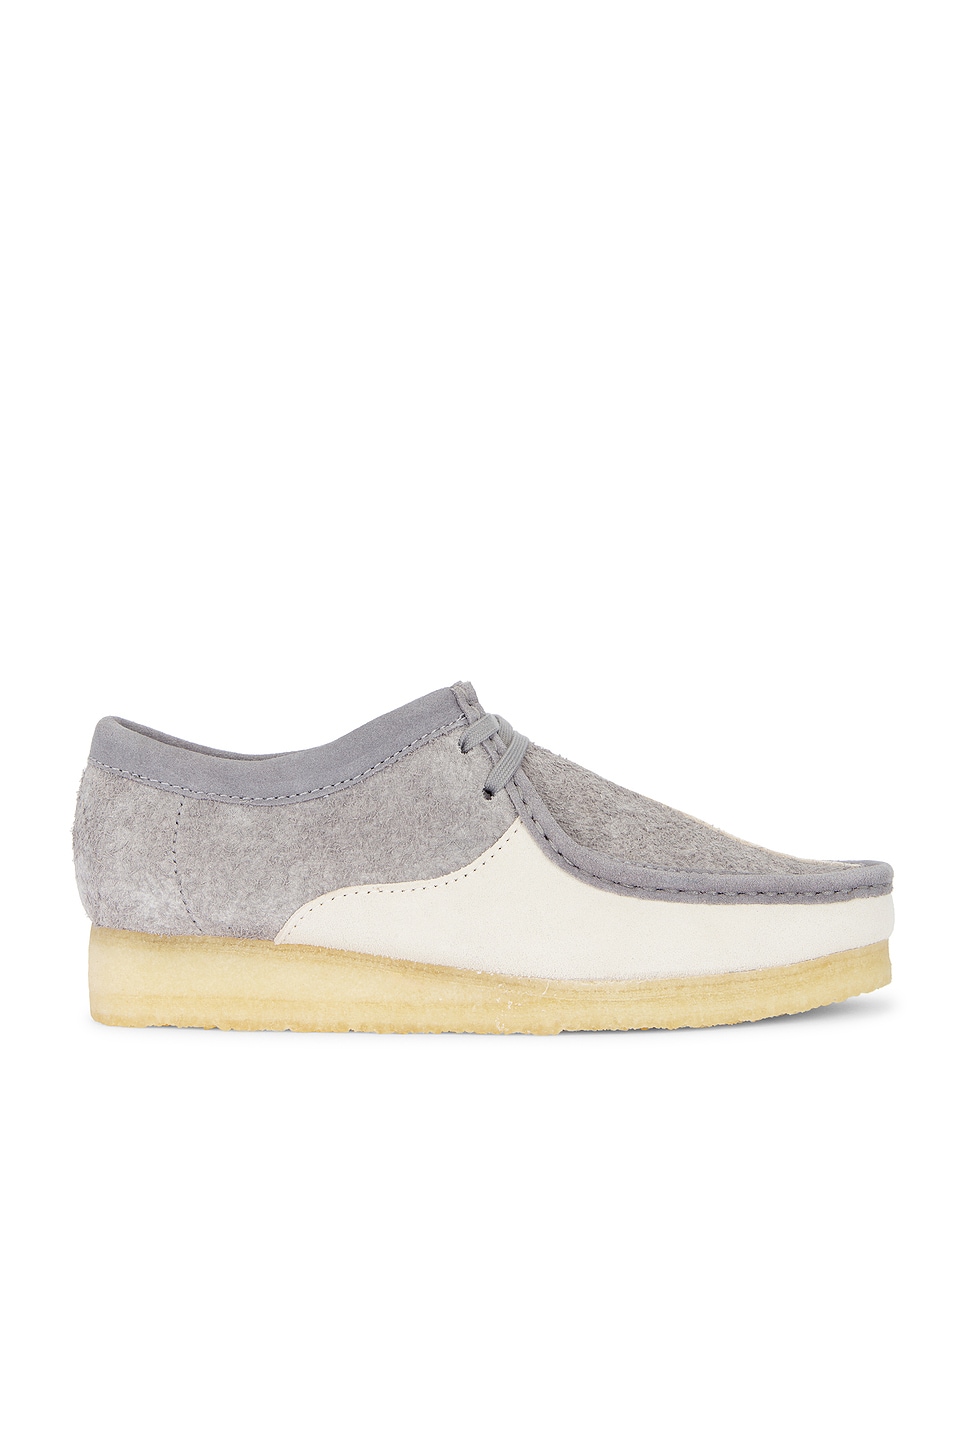 Image 1 of Clarks Wallabee Boot in Grey & Off White